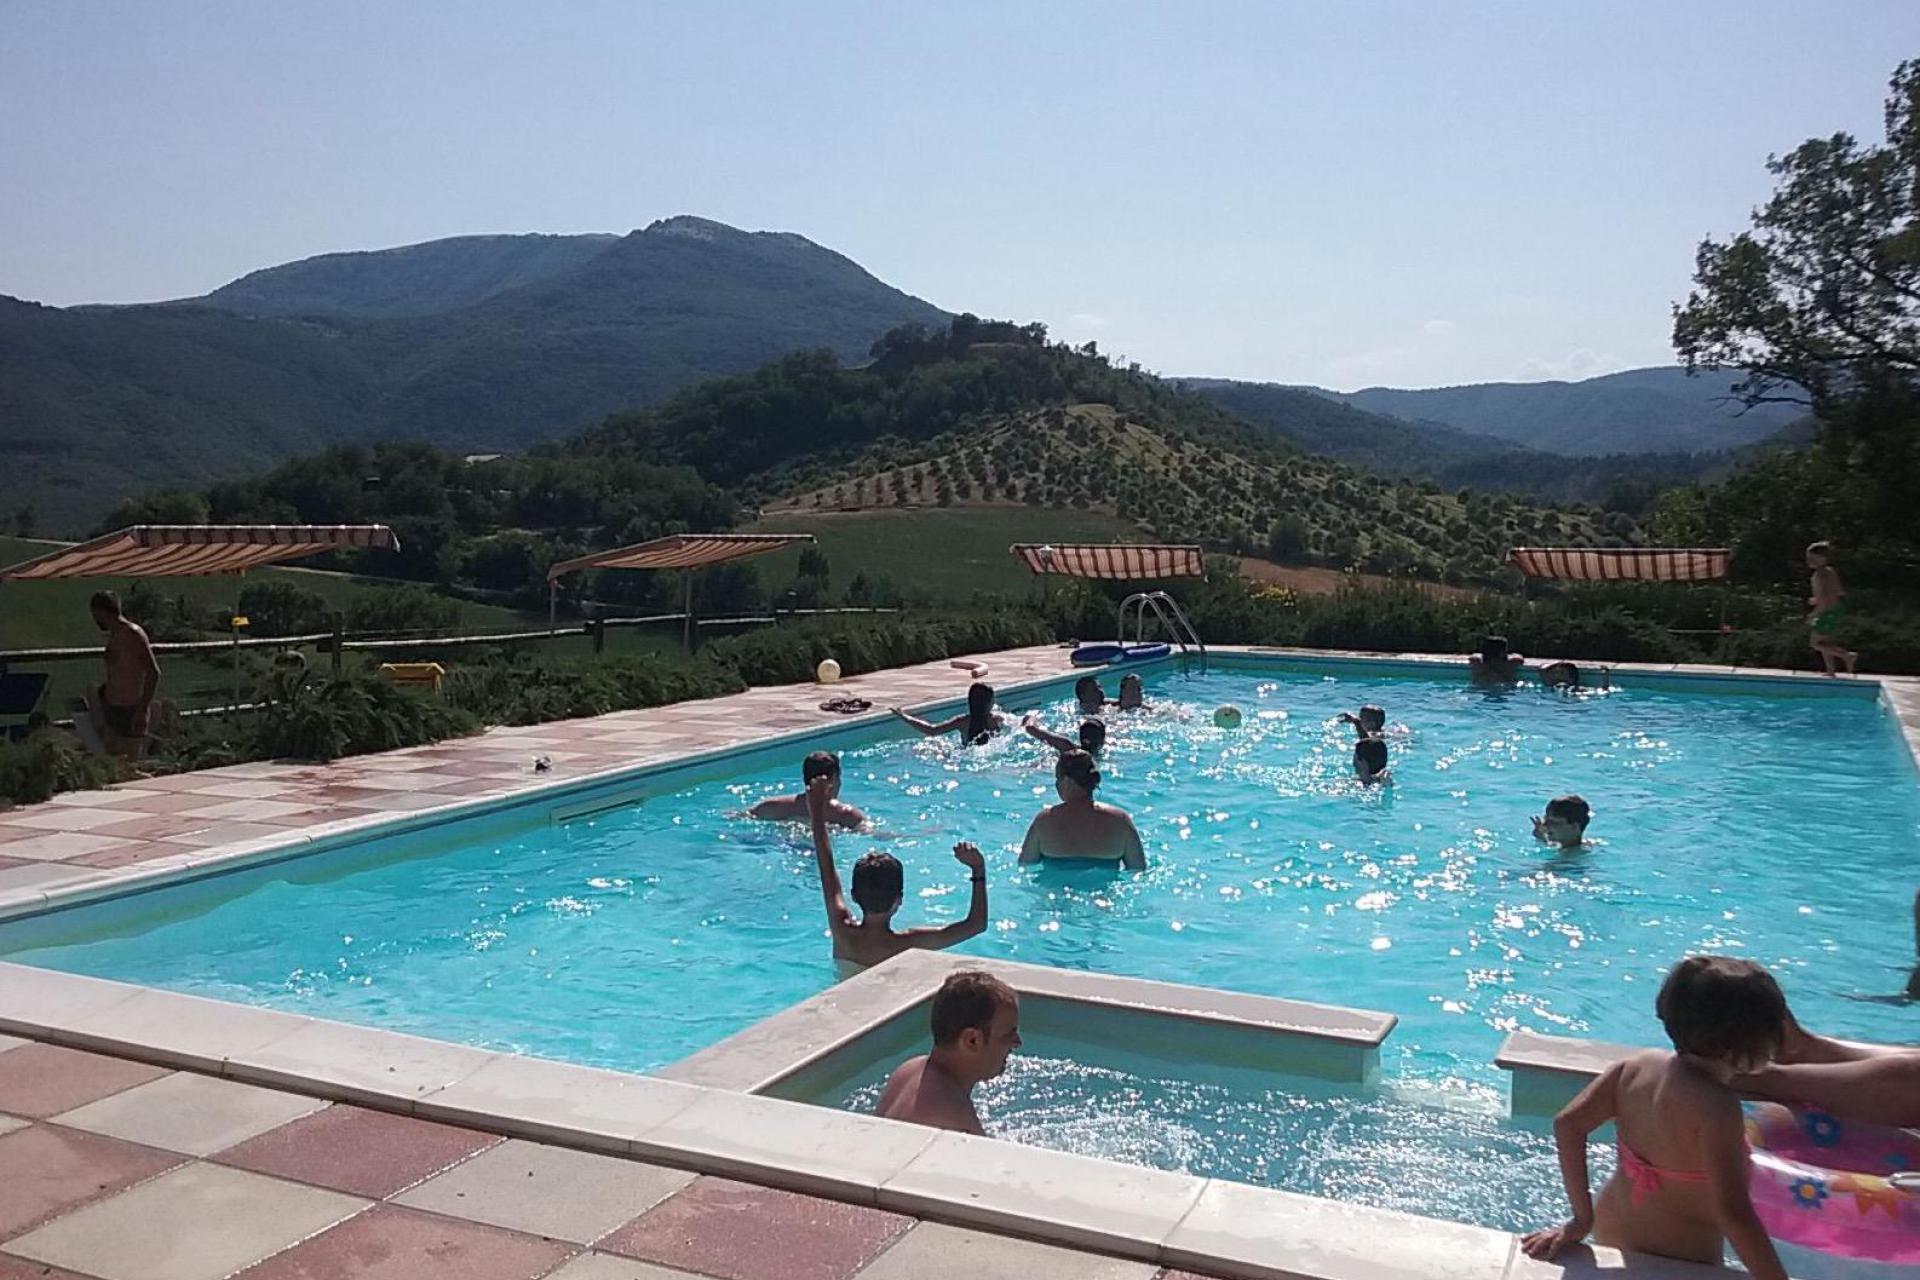 Nice, child-friendly agriturismo surrounded by nature in Le Marche